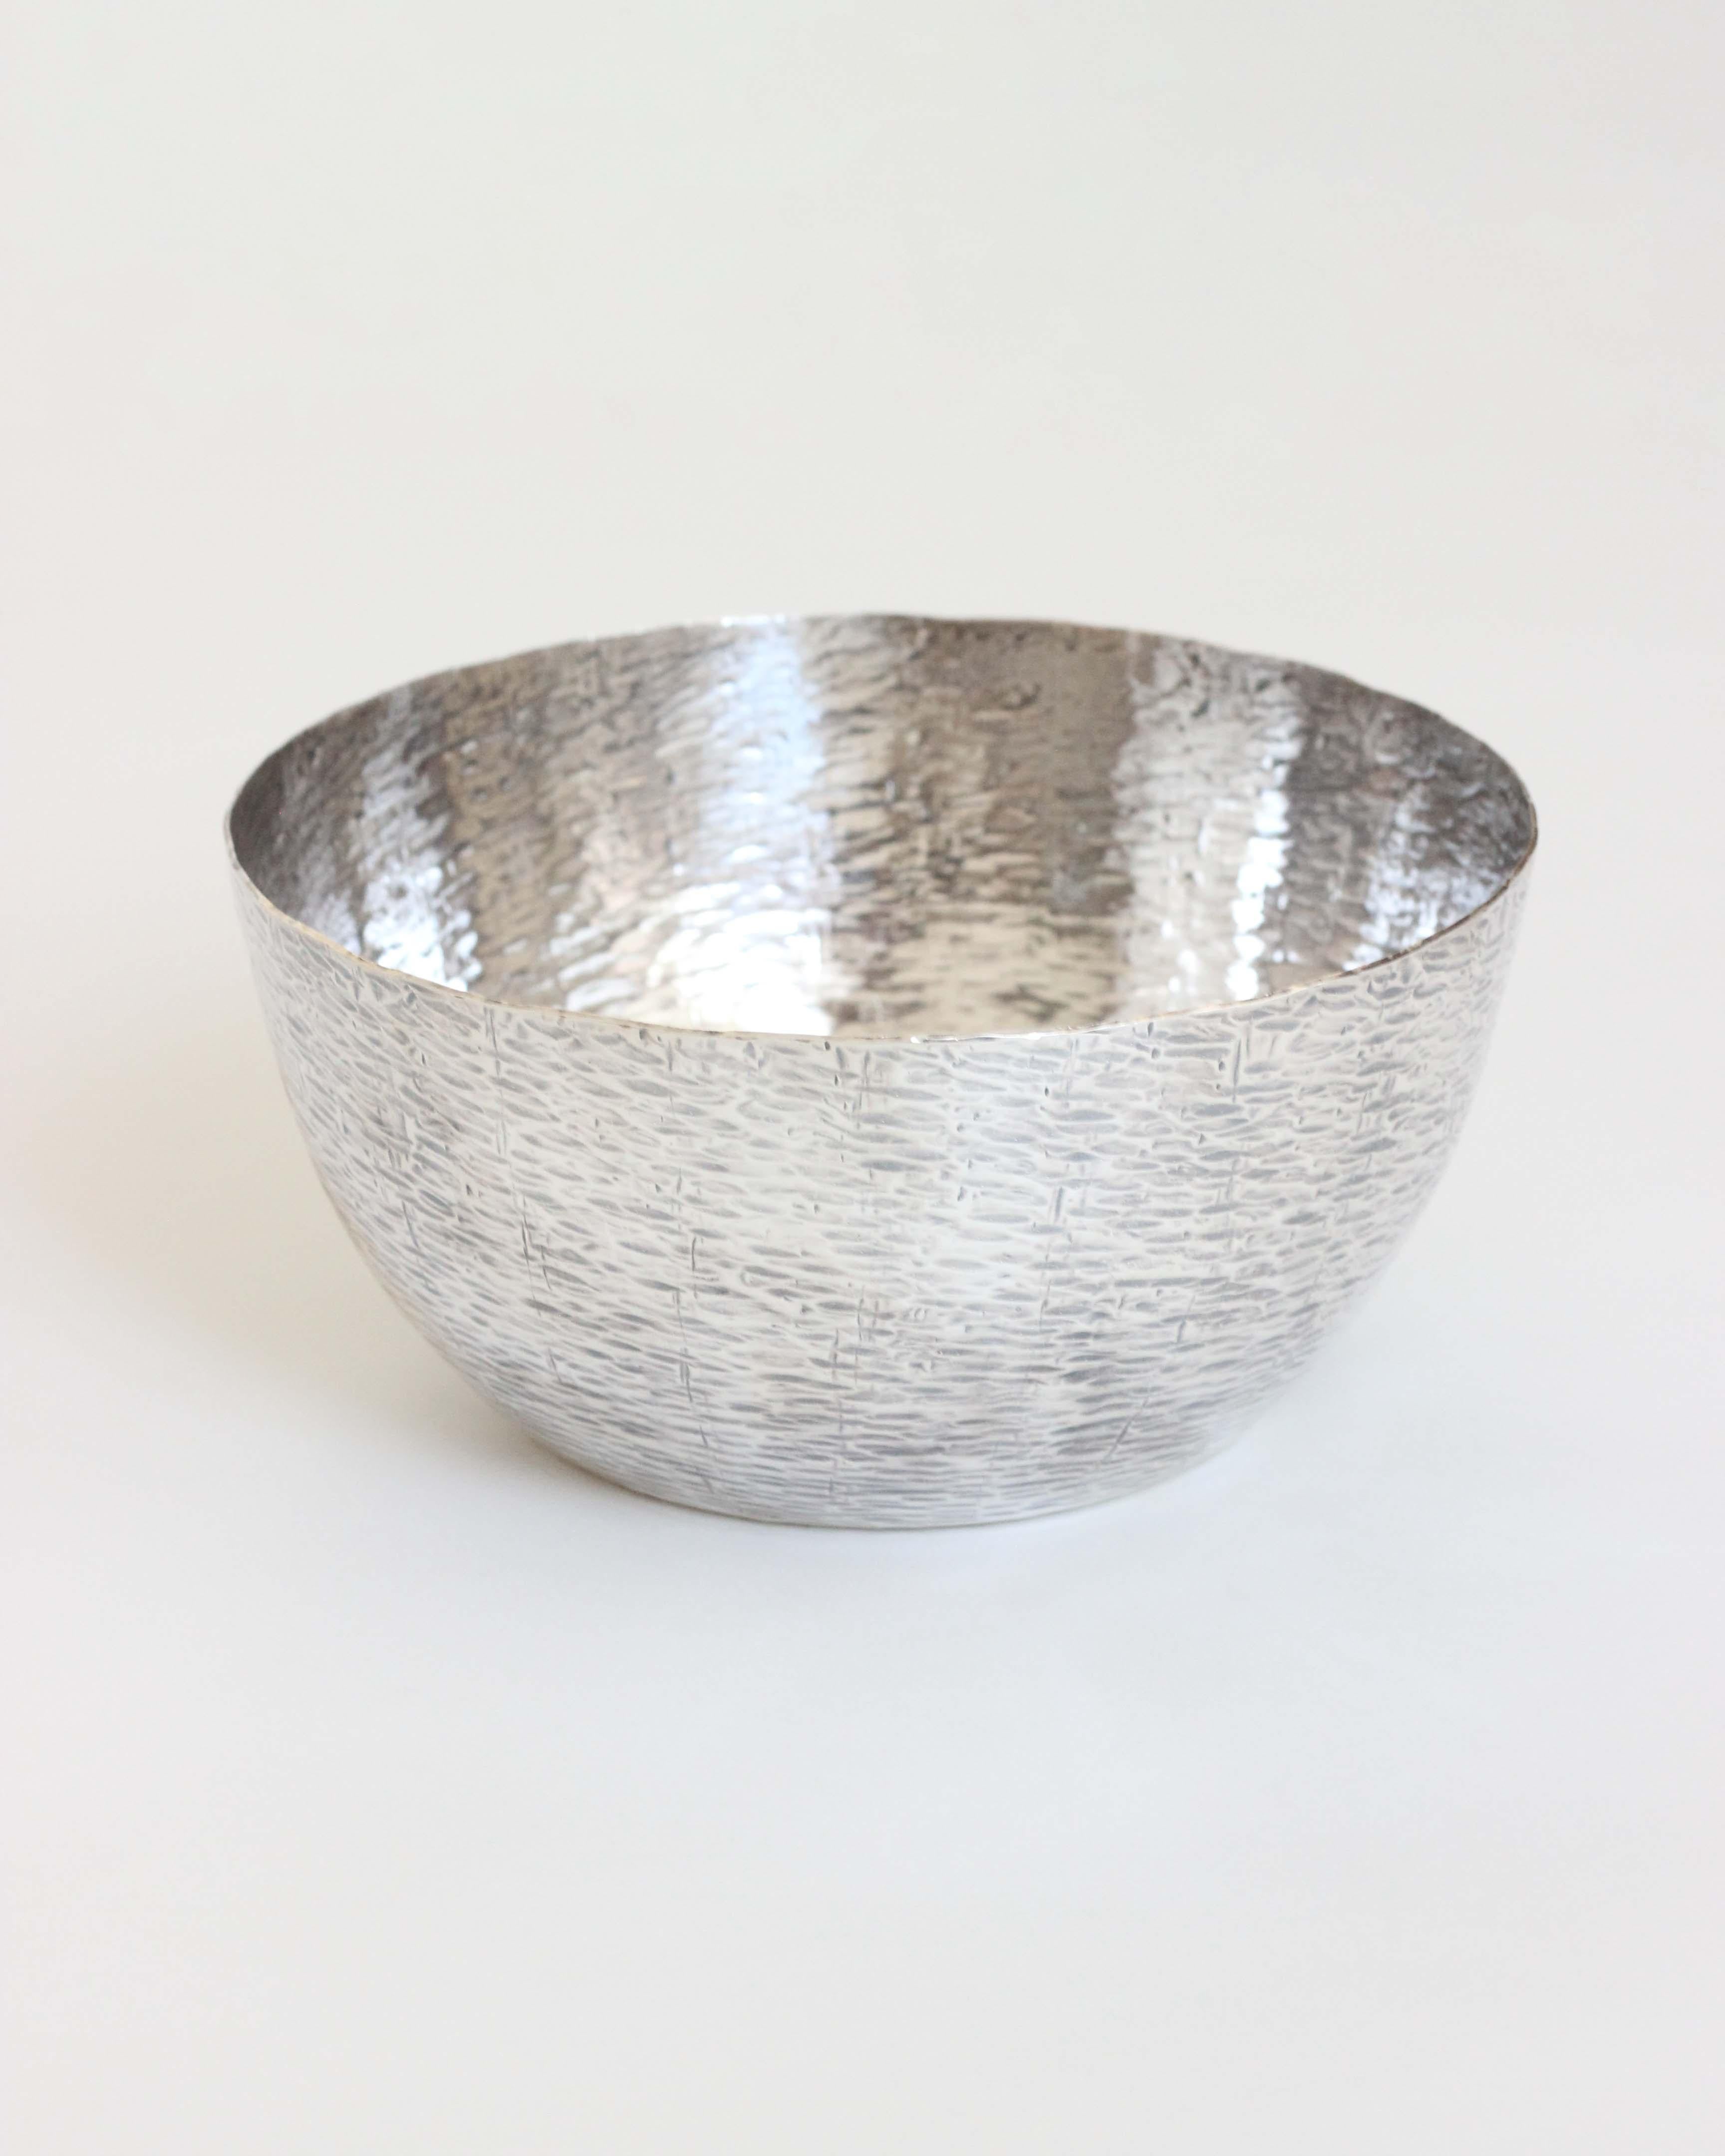 Rare and beautiful handmade, hammered .925 Sterling silver bowl by Tapio Wirkkala. 

Weight: 320g

Marked KÄSITYÖ (handmade) and with designer's monogram TW.

A leading figure of Post-war European design, Finnish designer and sculptor Tapio